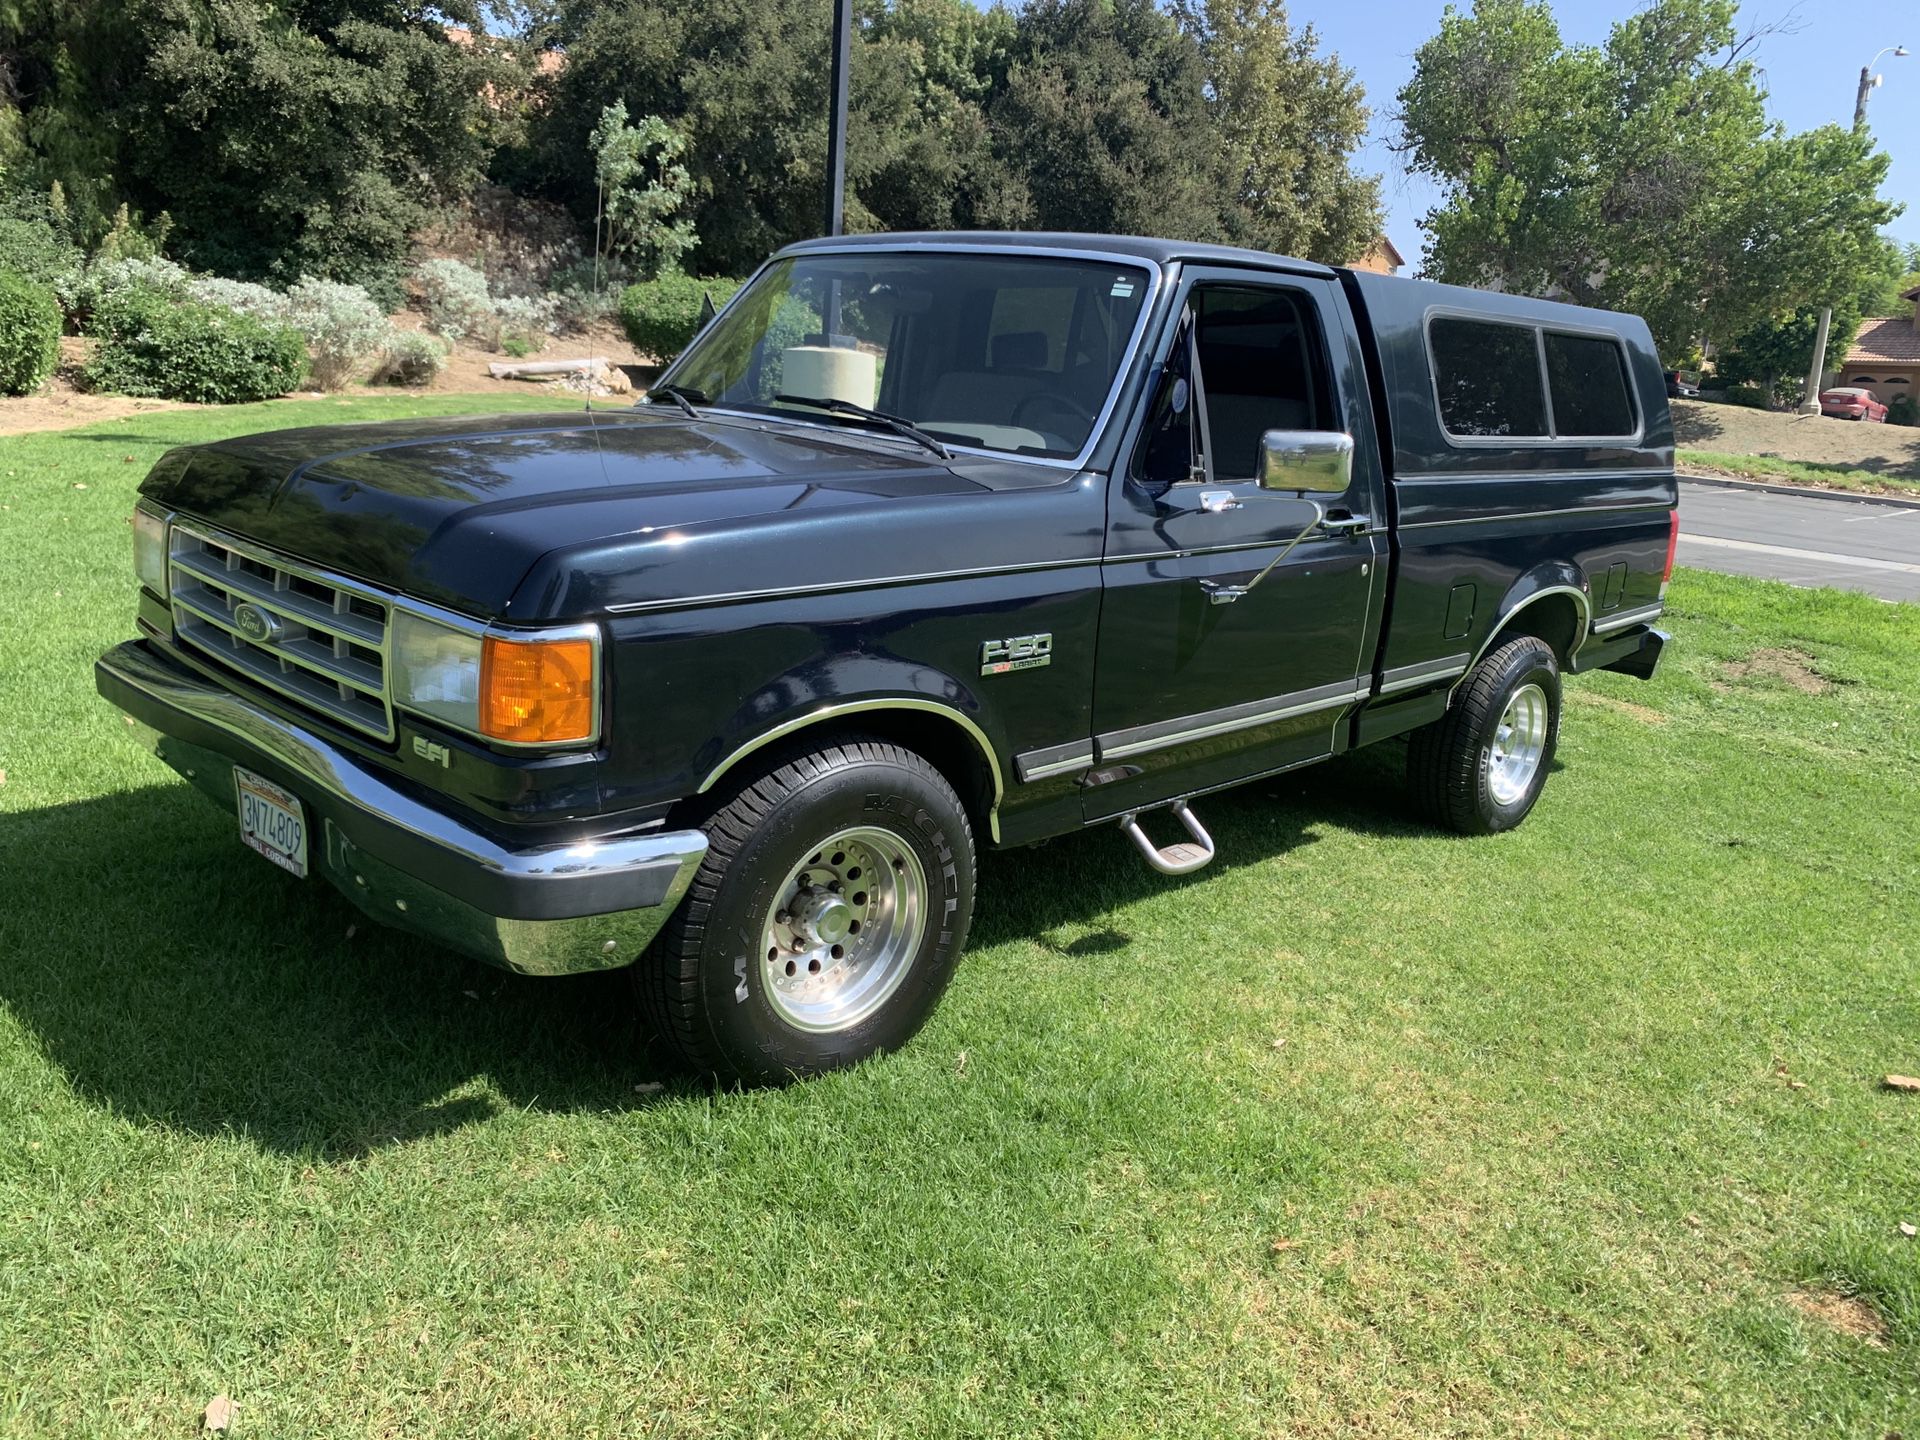 1988 Ford F-150 Single cab Short Bed